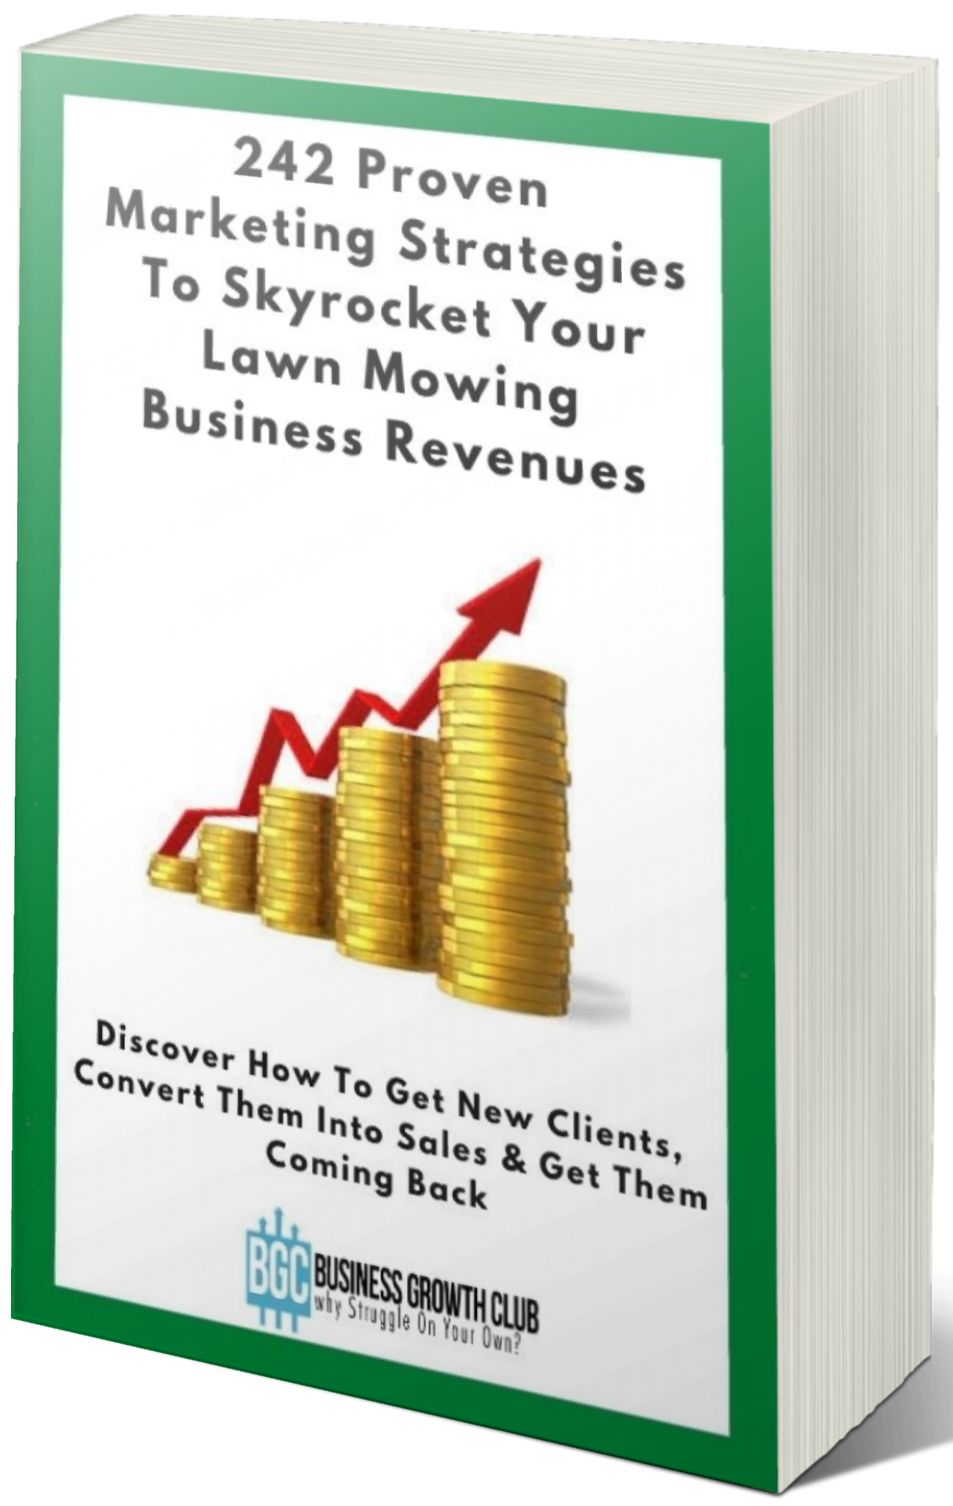 242 marketing strategies to skyrocket your lawn mowing  business sales and revenues 1